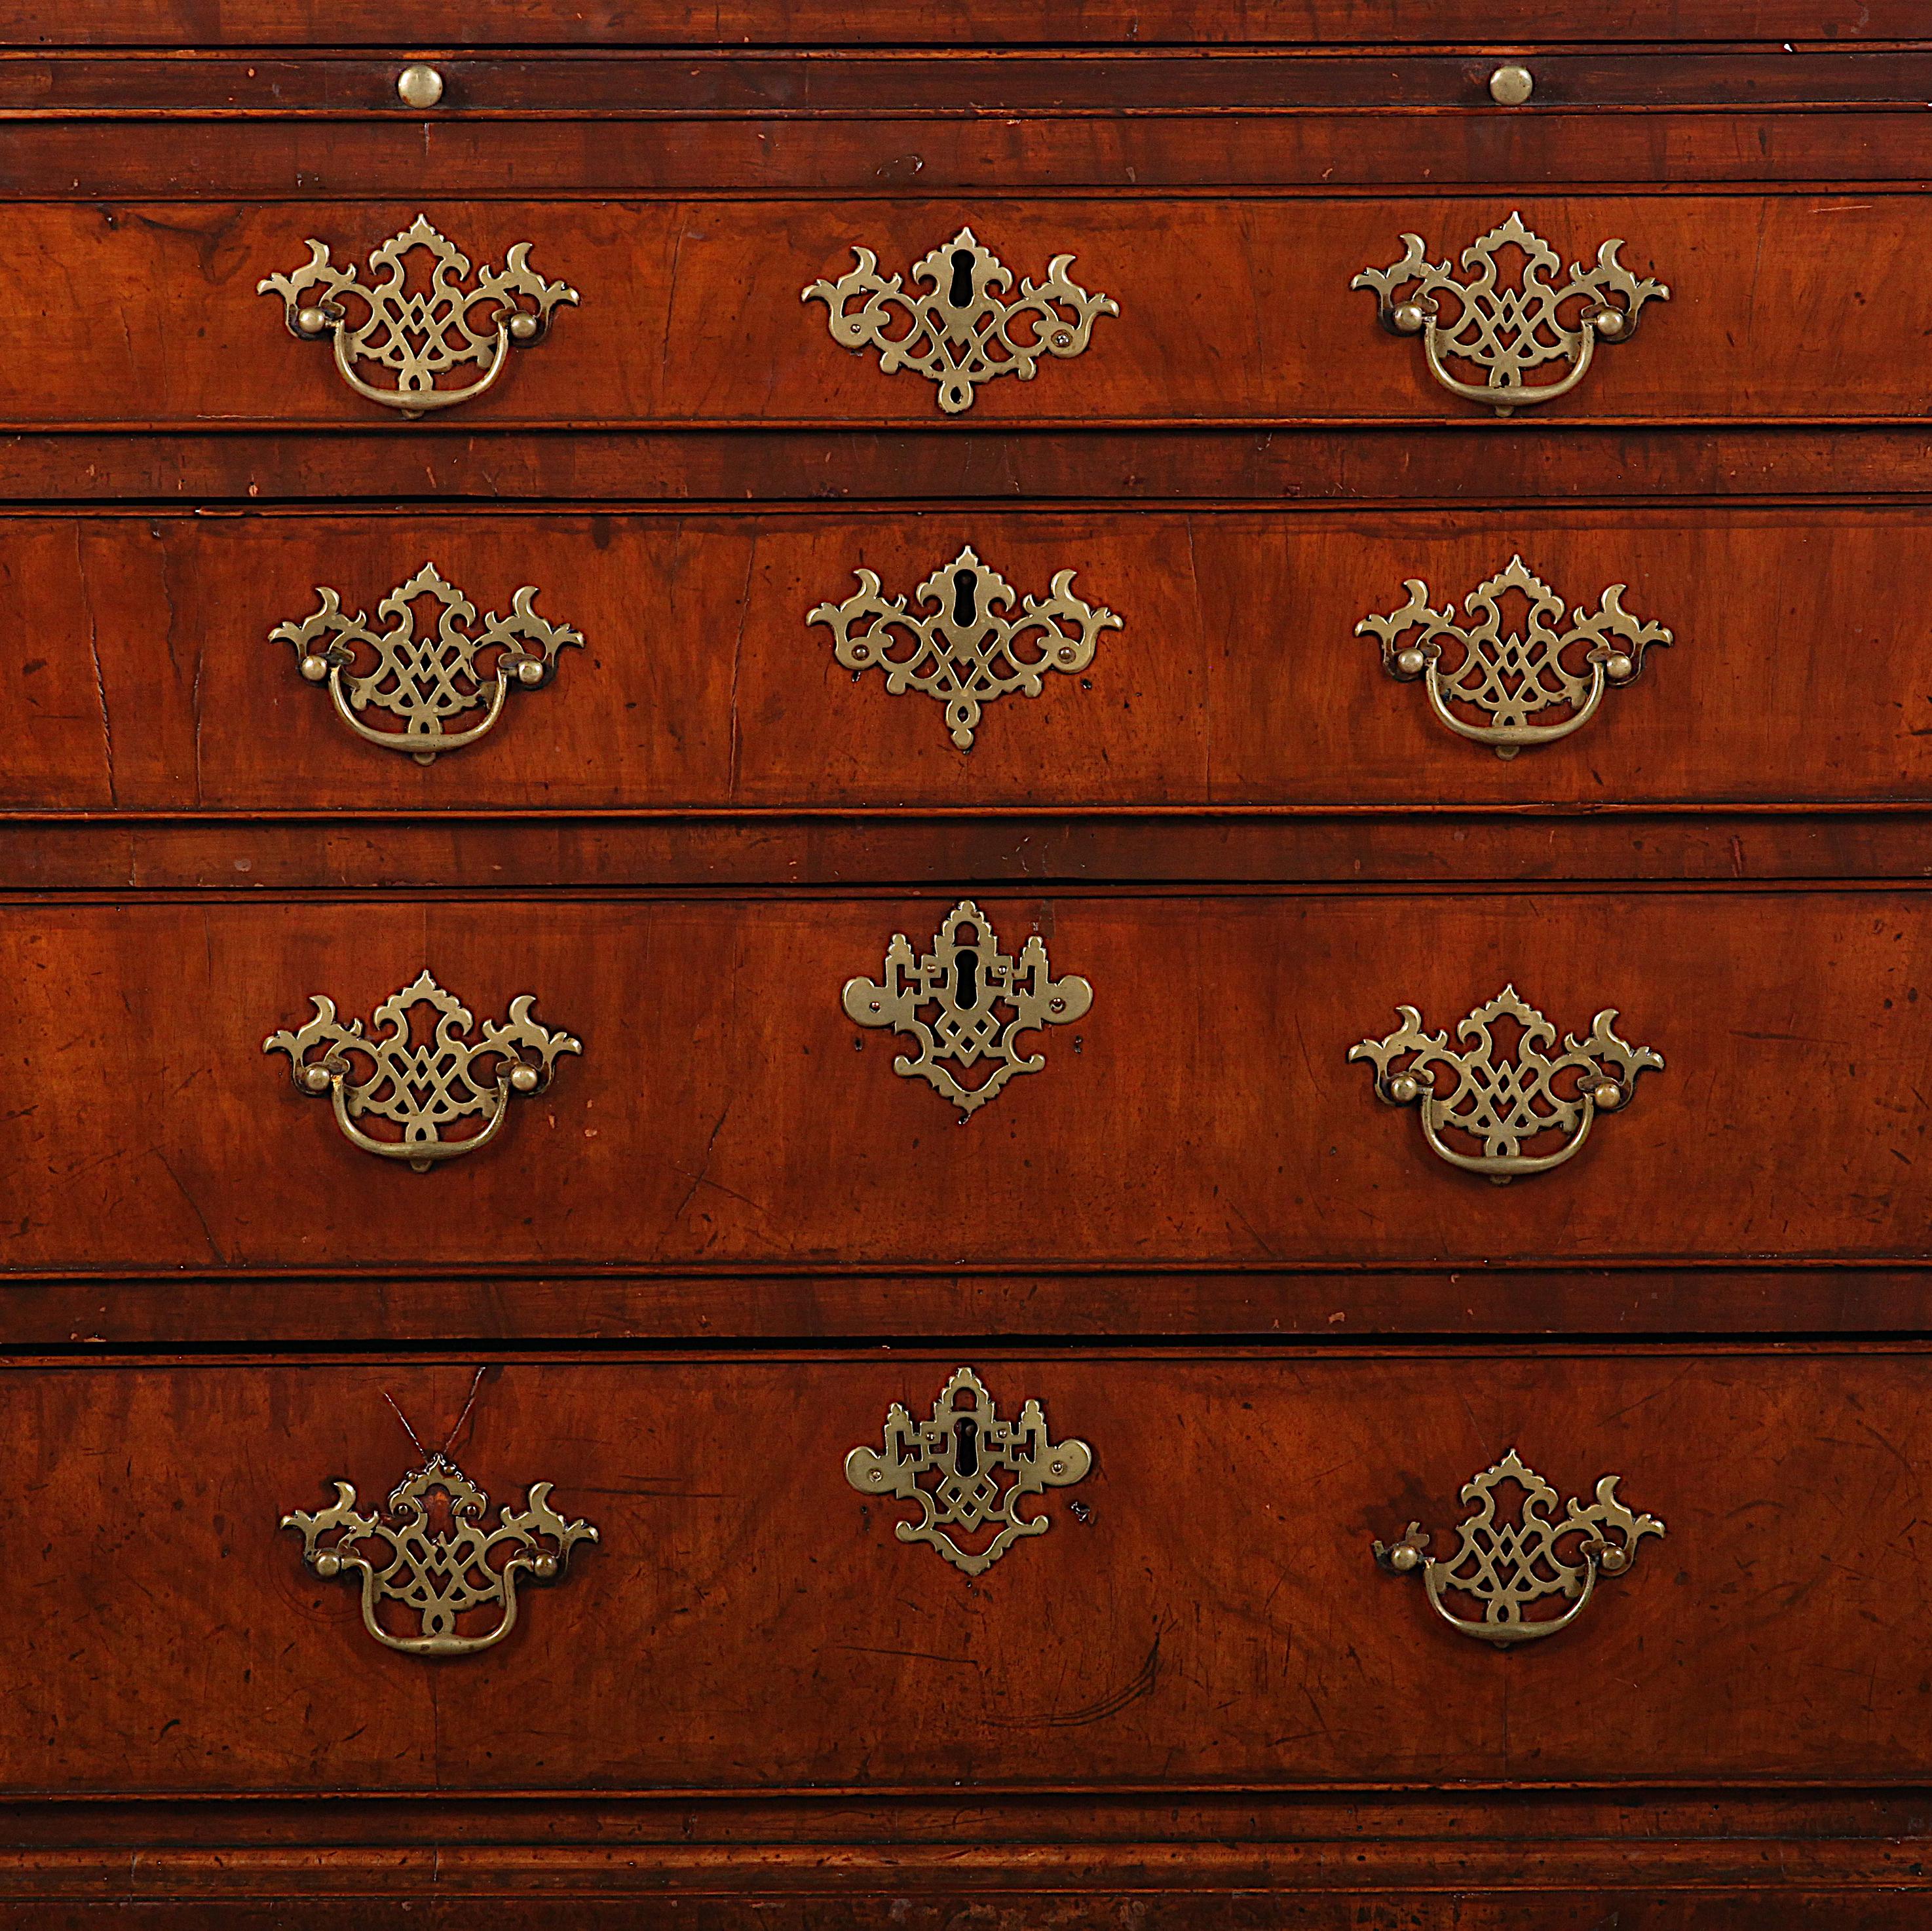 18th Century English Georgian bachelors chest in walnut with four graduated drawers below a pull-out brushing slide, the whole raised on square bracket feet. Book-matched figured walnut veneered drawer fronts and top.